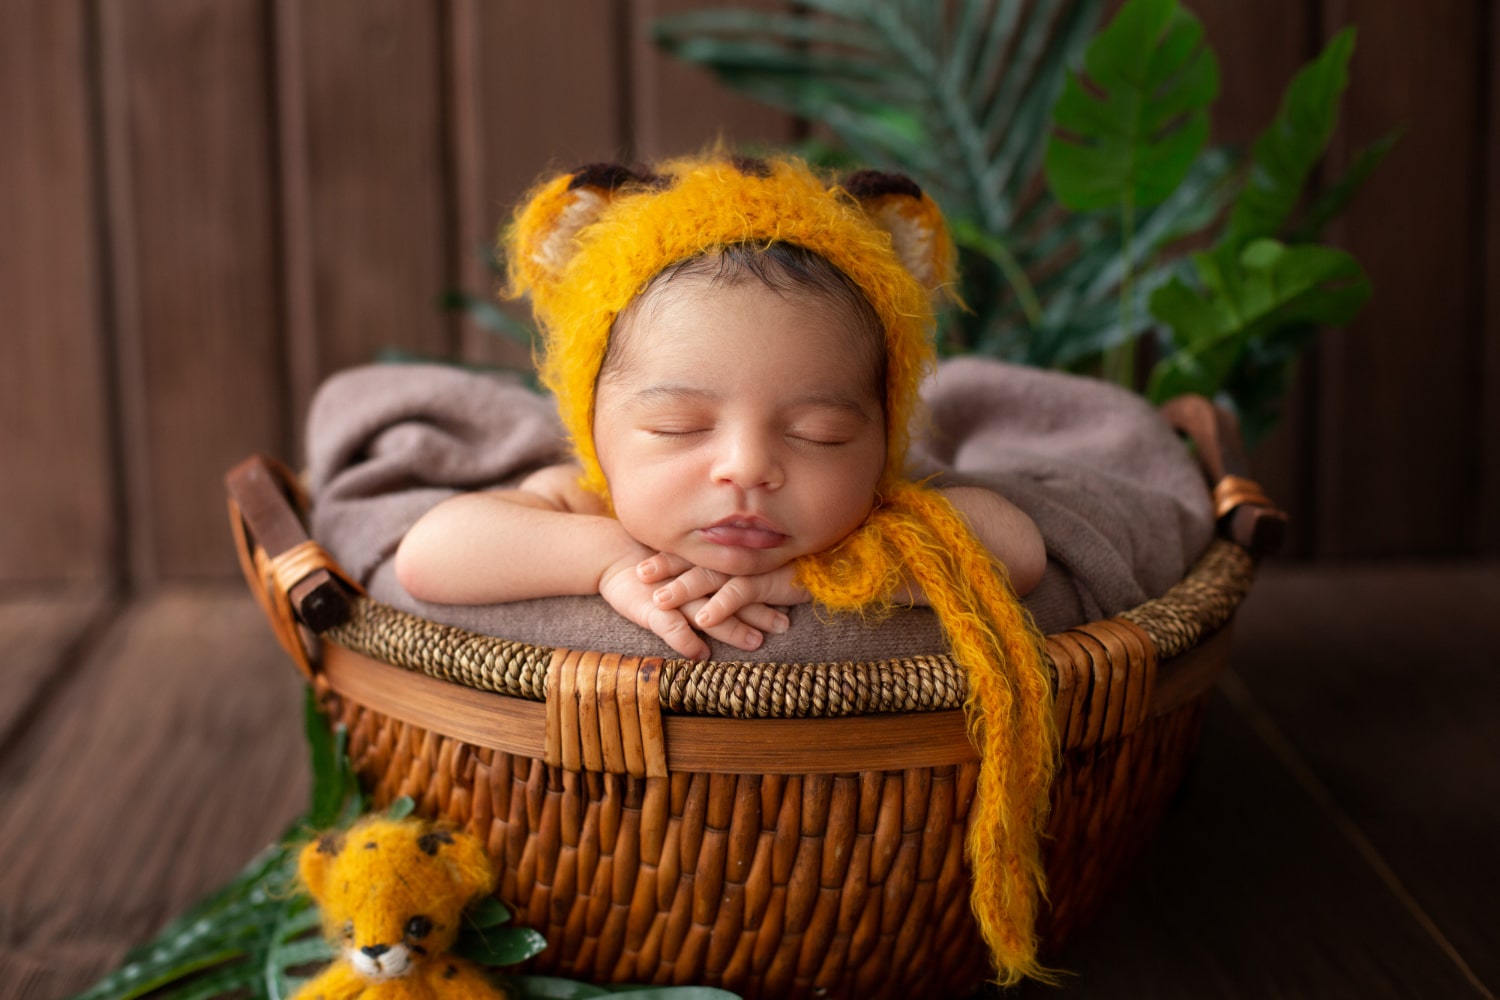 Cute baby in a basket, capturing adorable innocence and coziness.